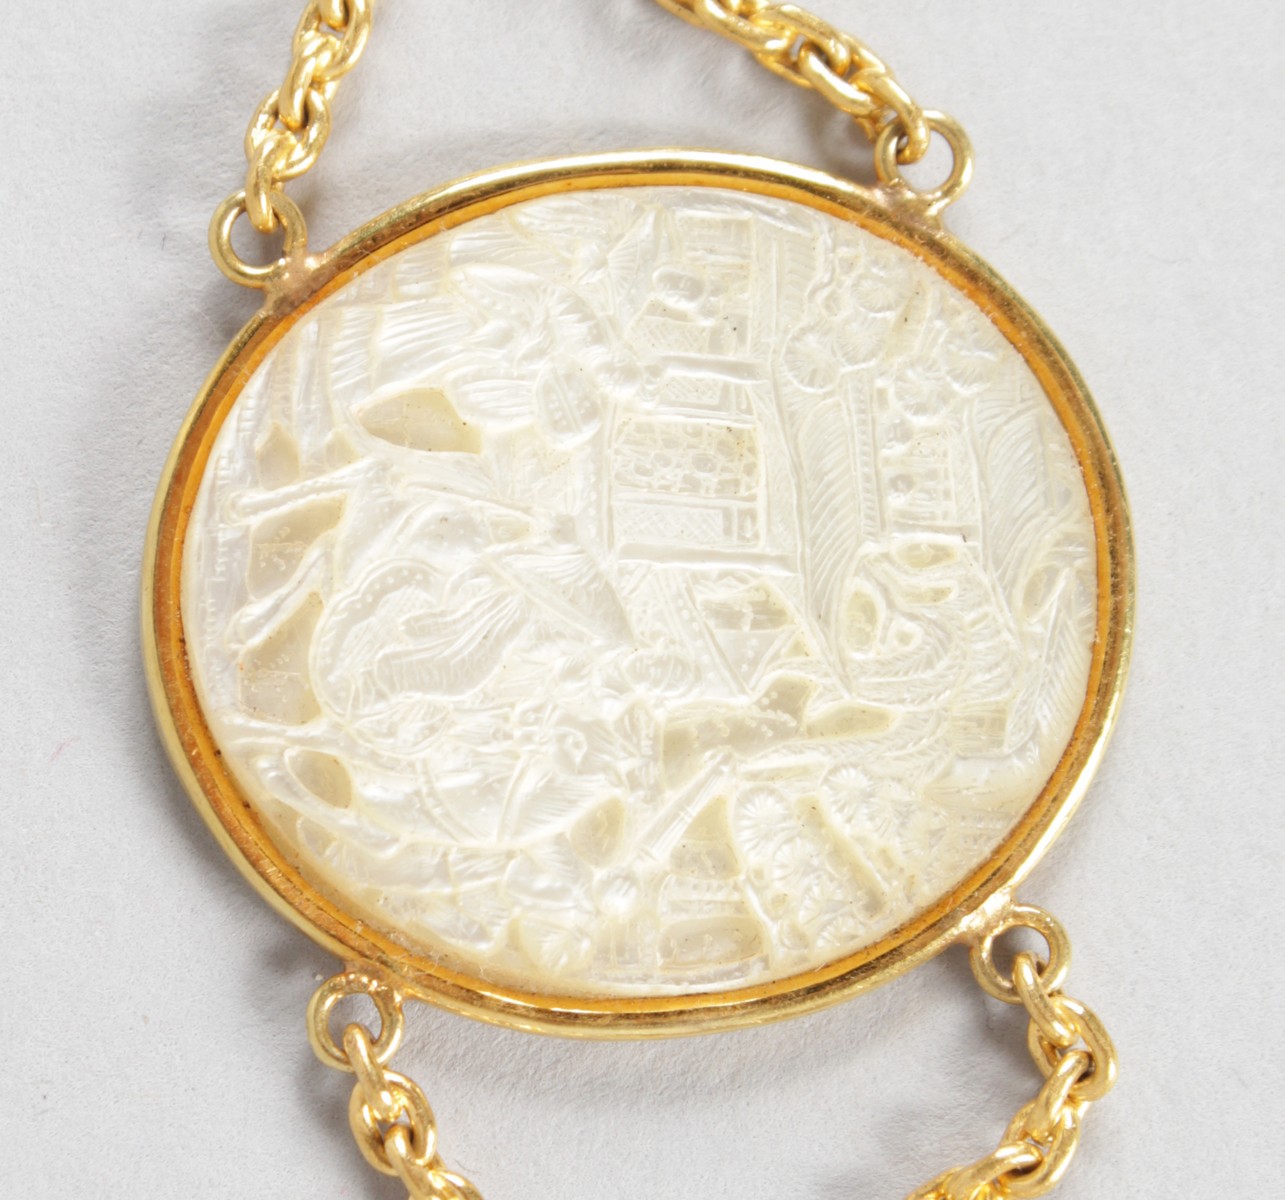 A SUPERB GOLD BRACELET set with SEVEN CARVED CHINESE MOTHER-OF-PEARL OVALS. - Image 5 of 9